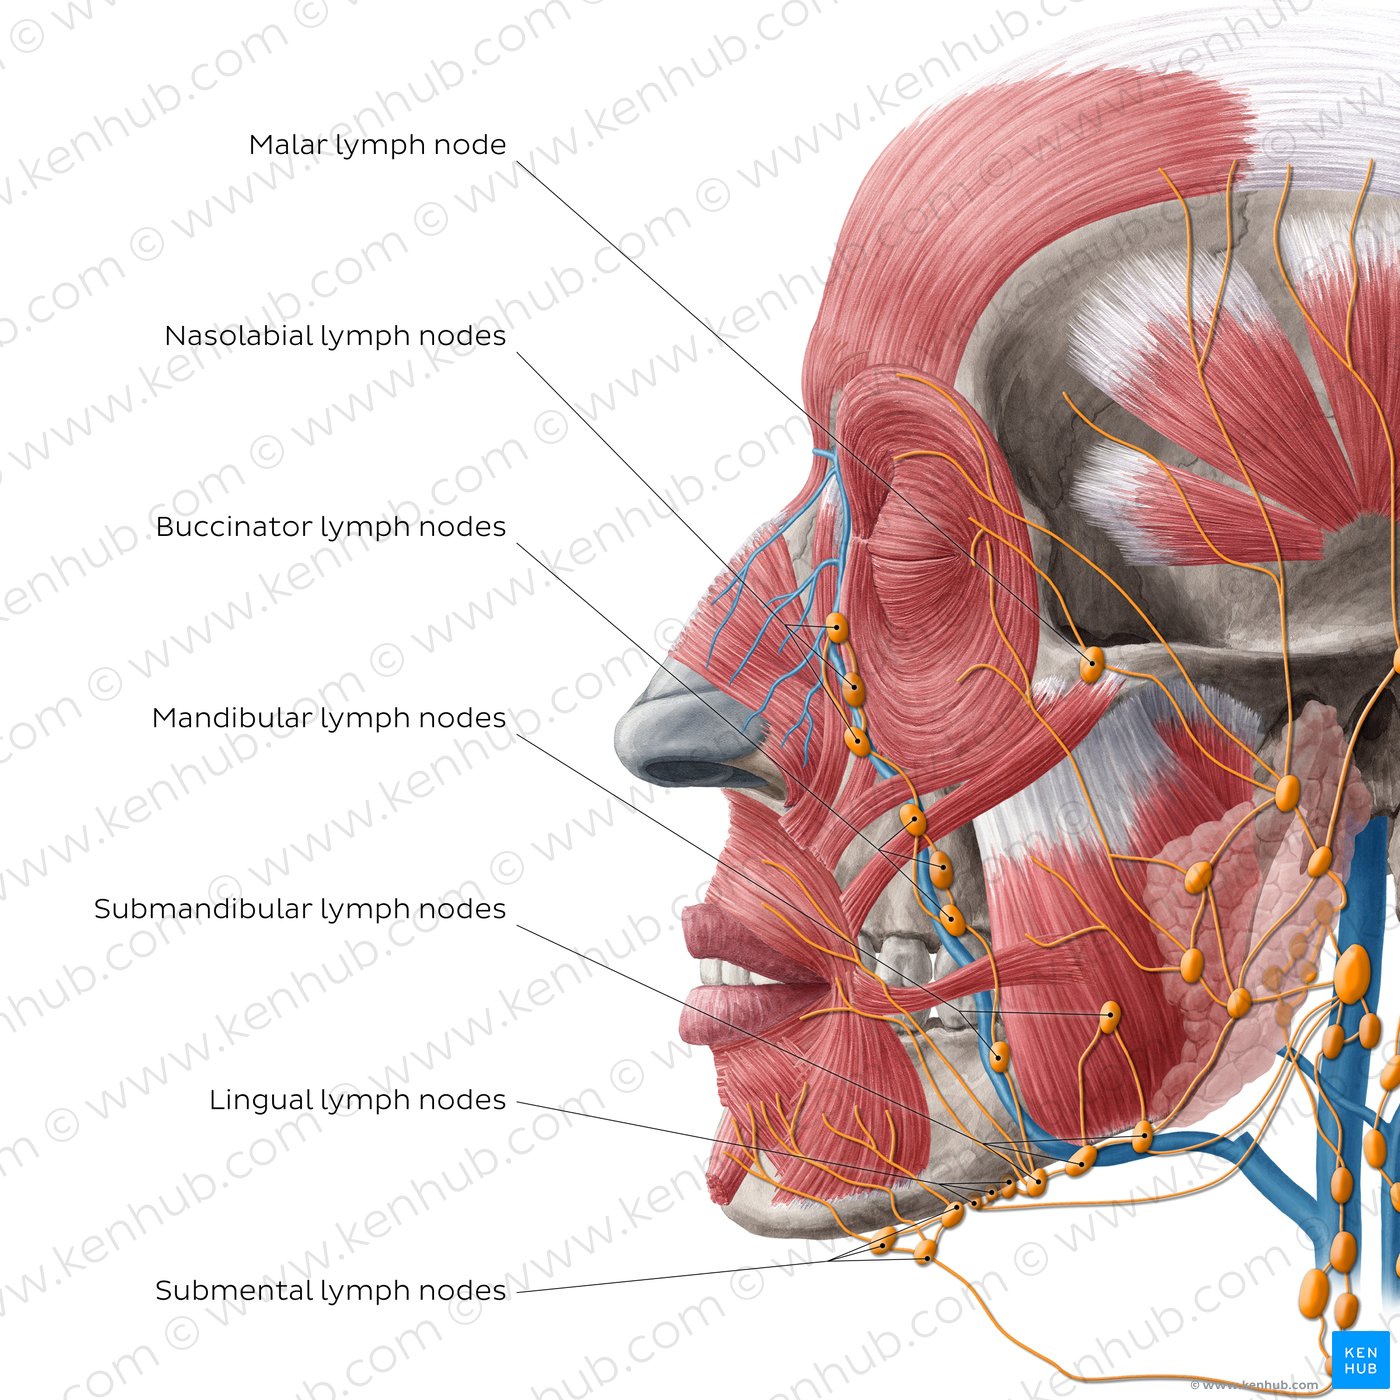 Lymphatics of the head (Lateral)